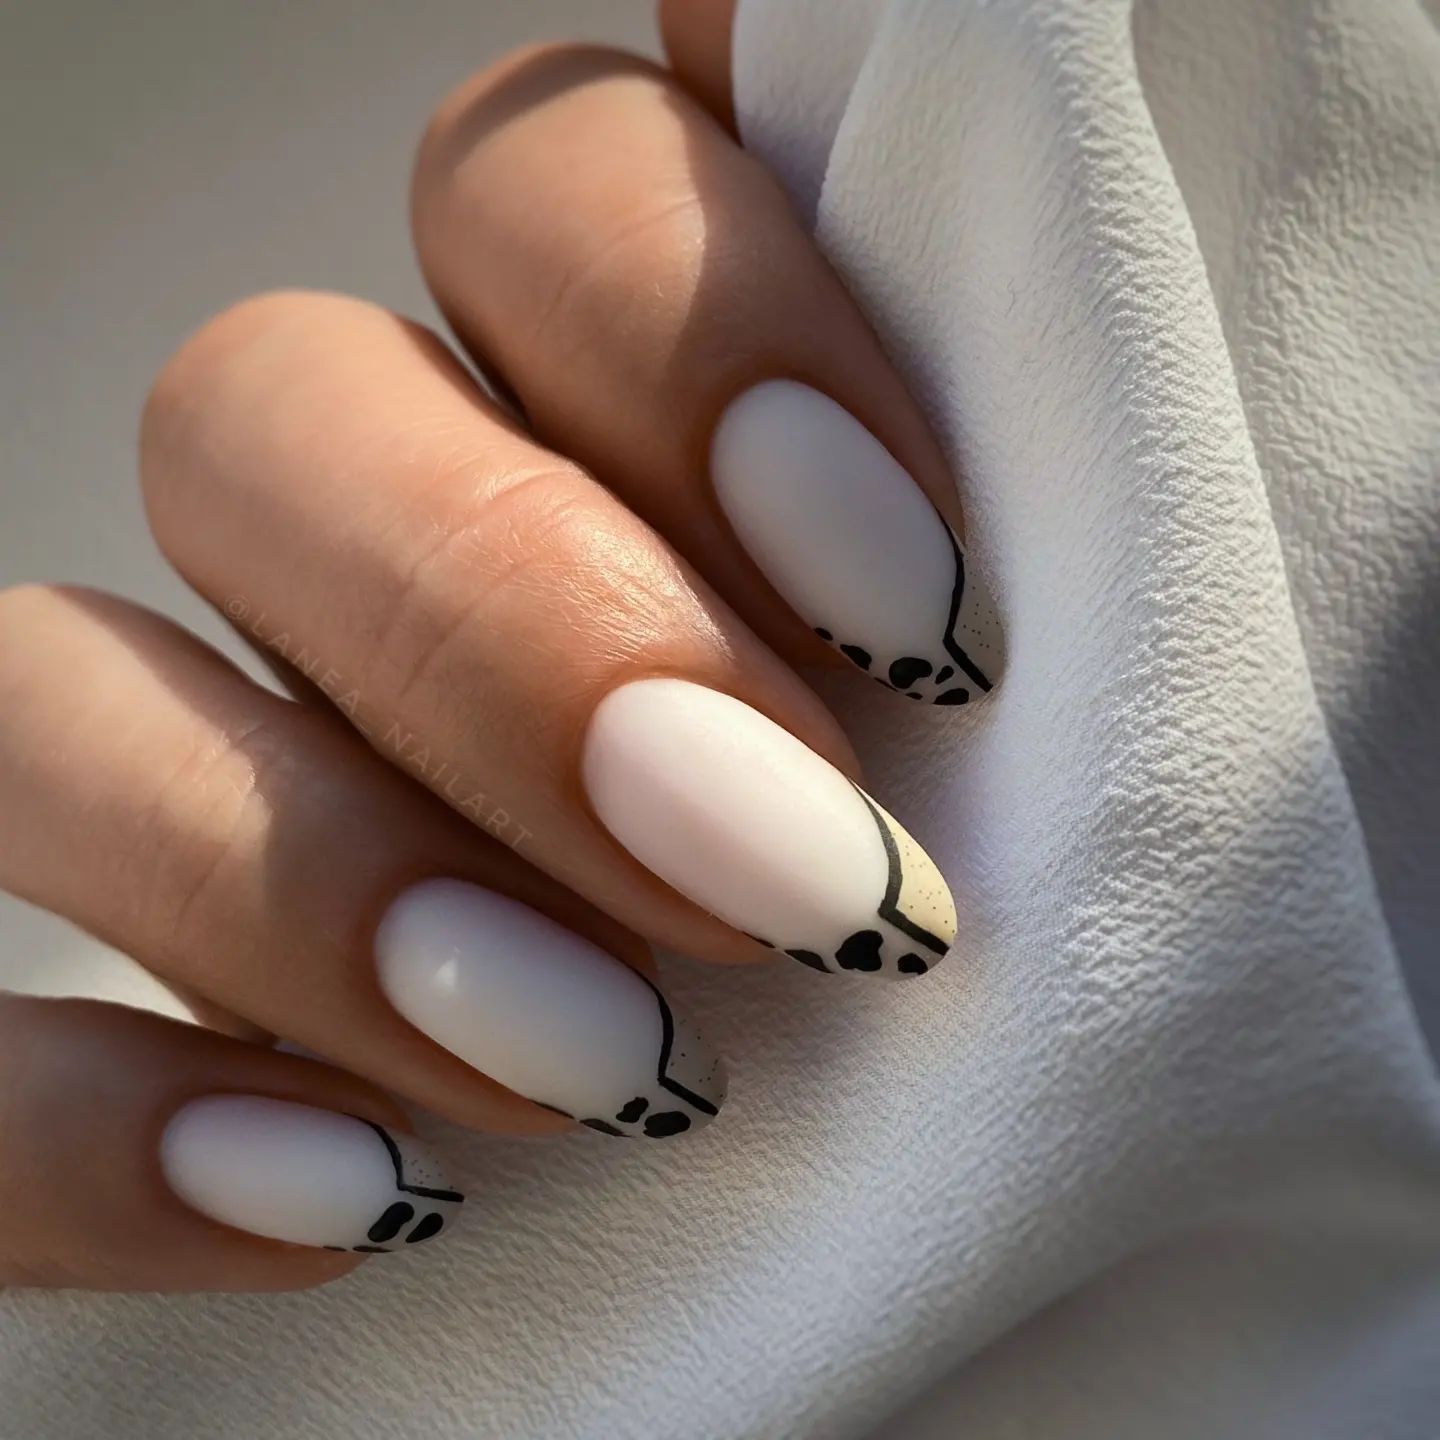 Milky White Nails with Leopard Print on Tips